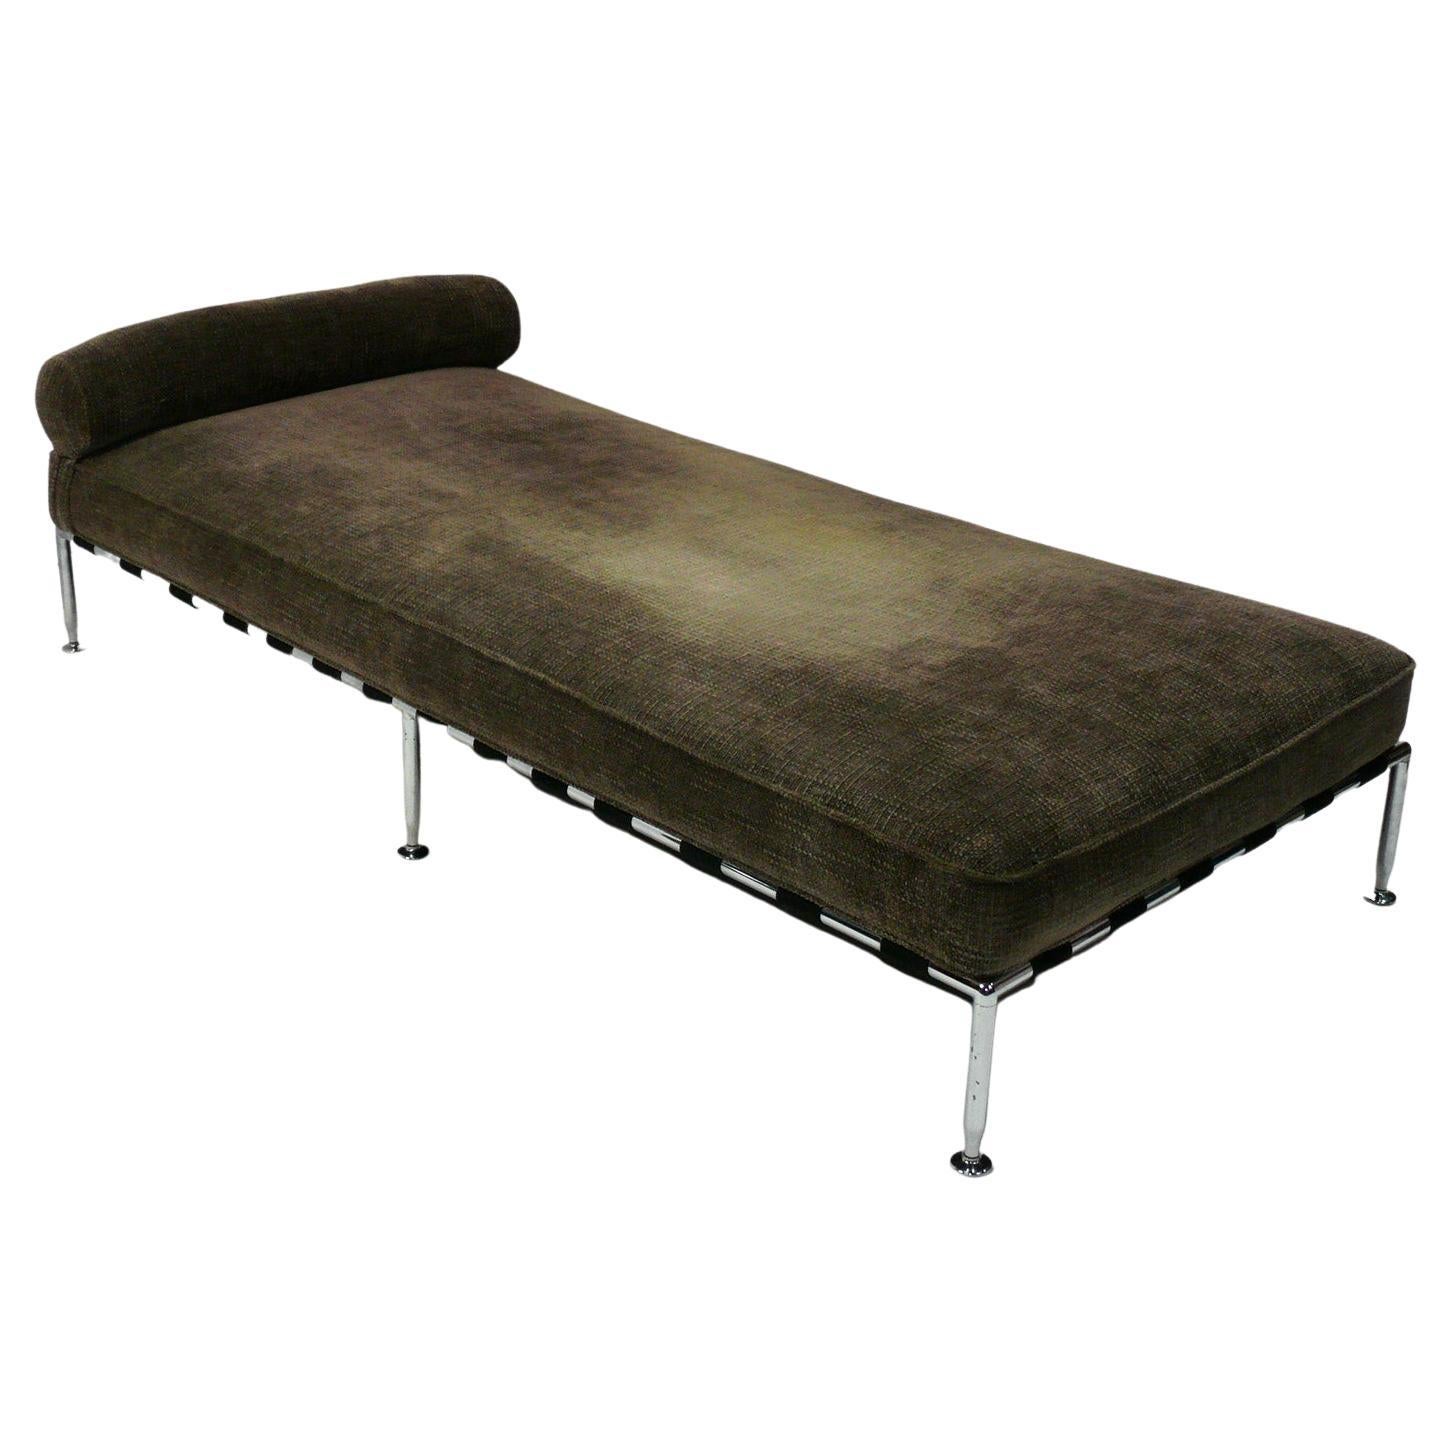 B&B Italia Antonio Citterio Daybed or Bench Reupholstered in your fabric  For Sale